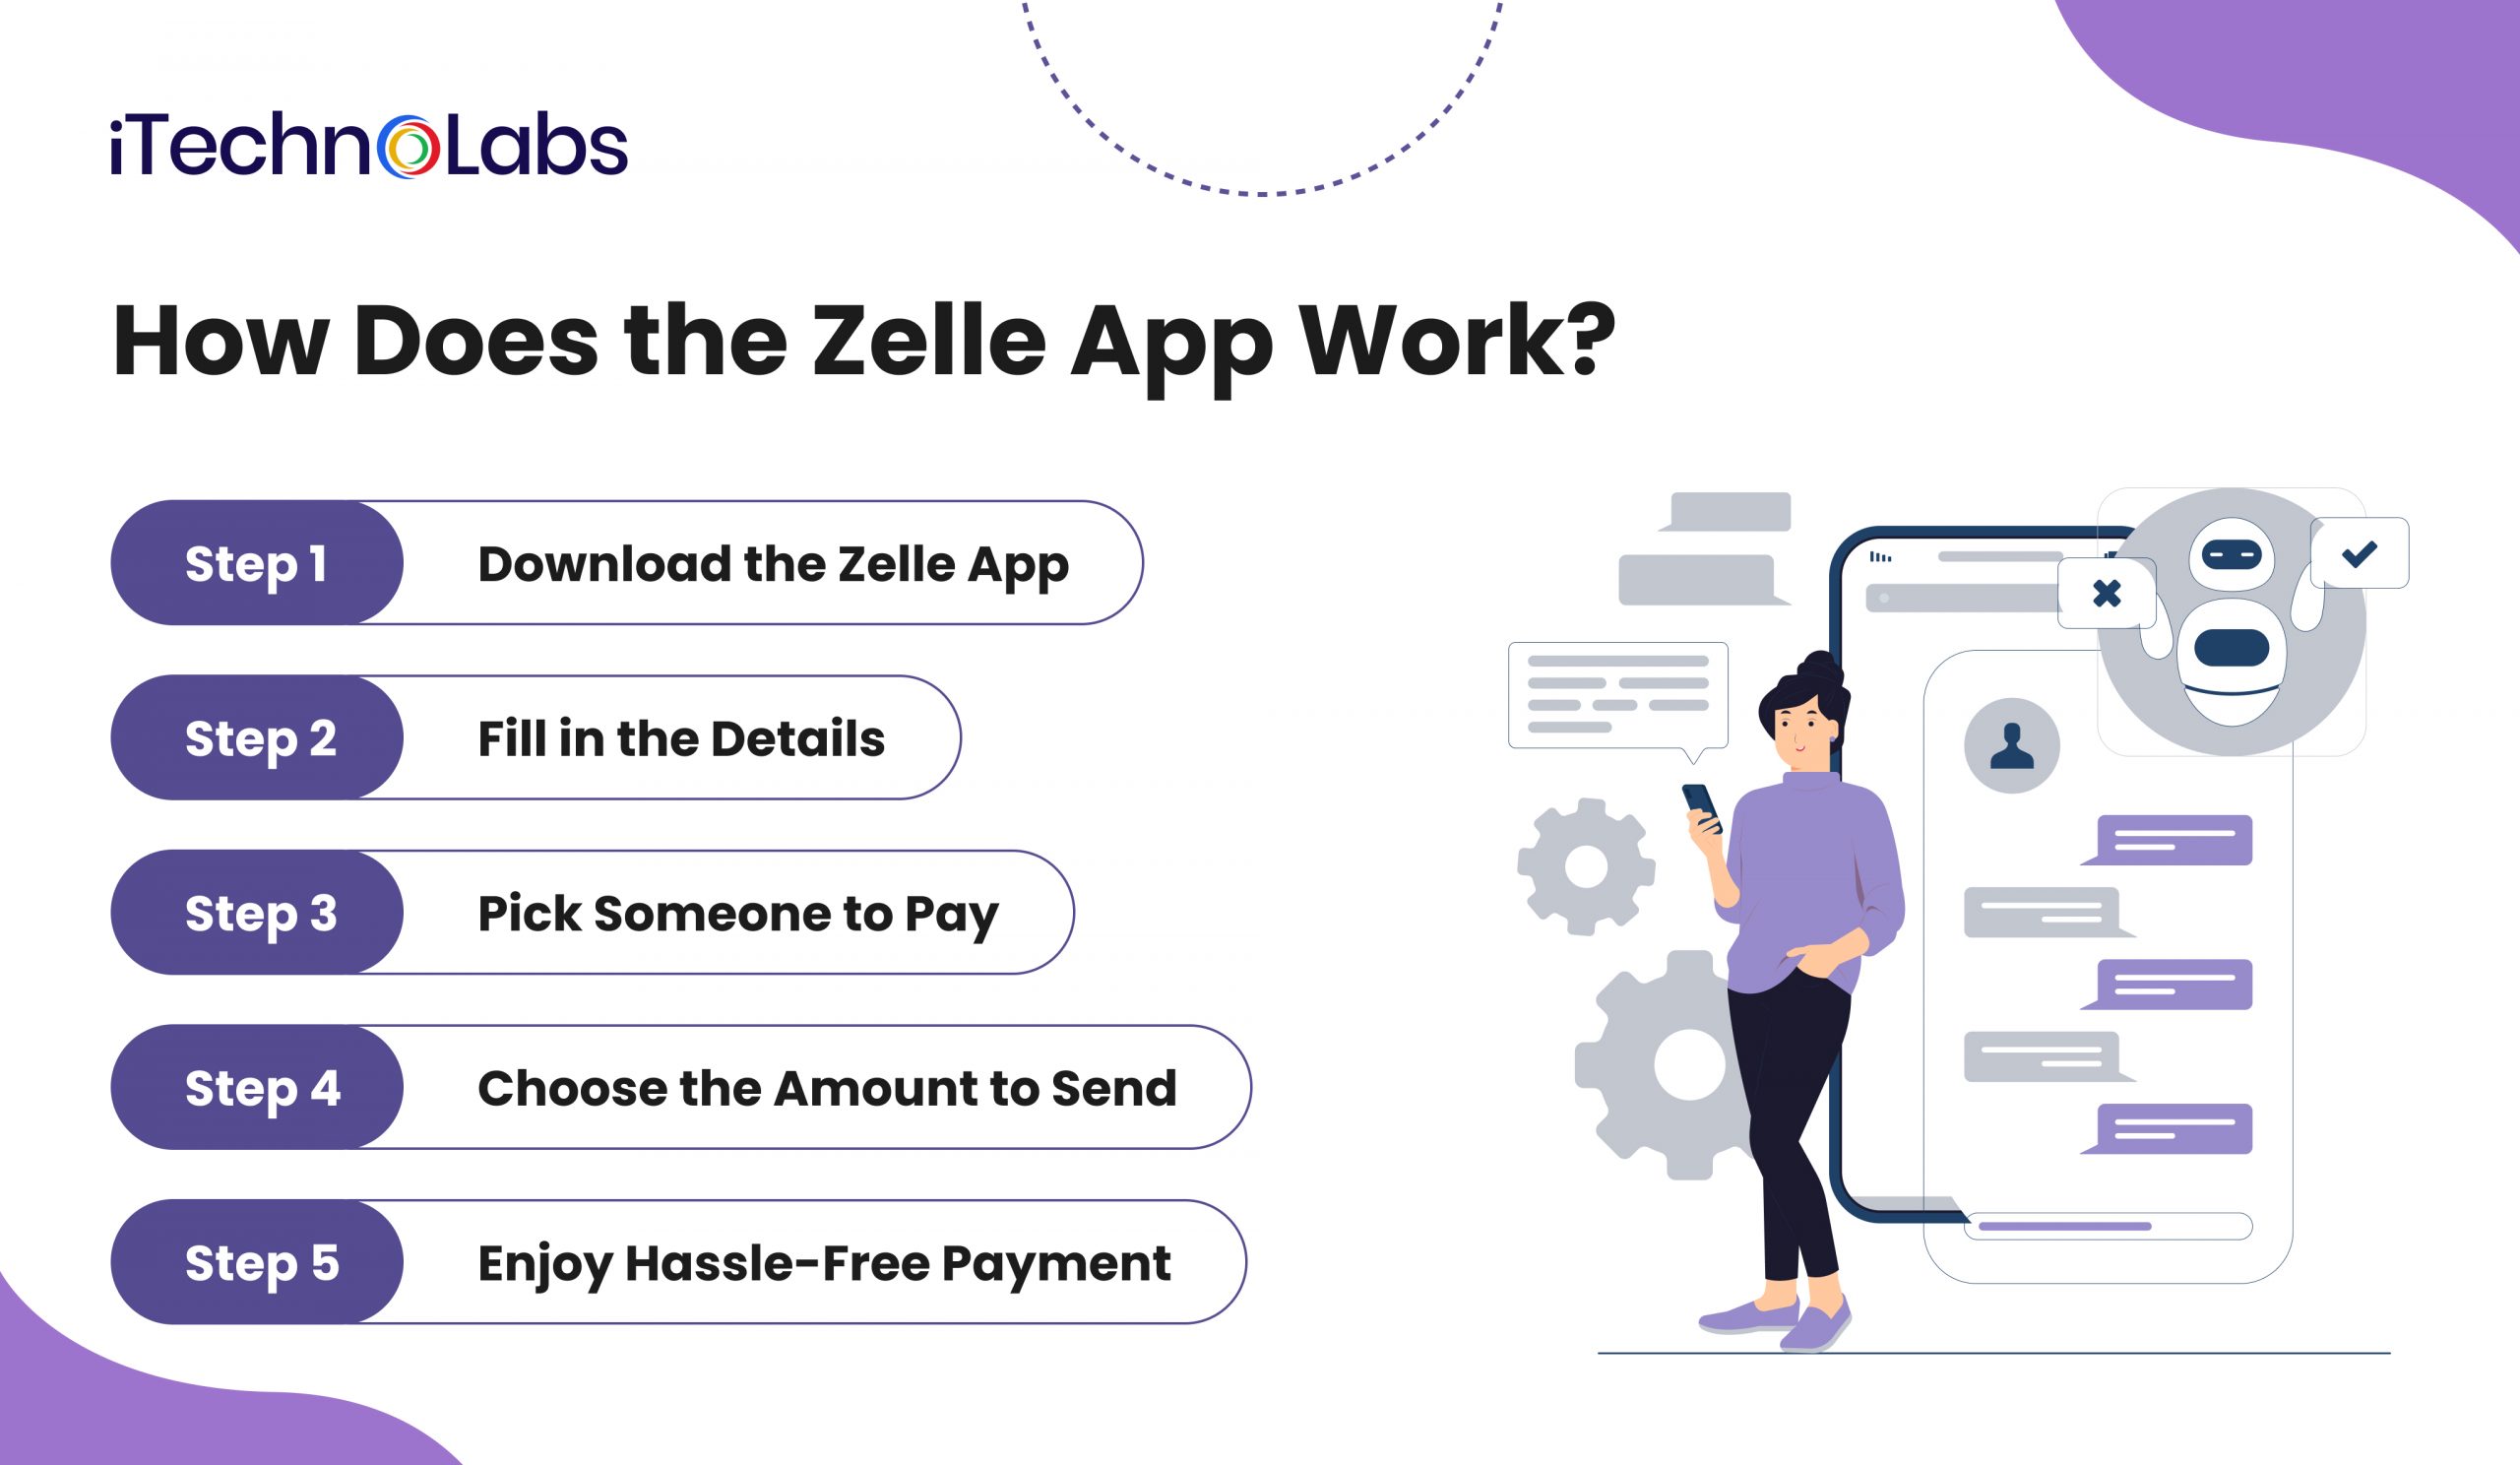 iTechnolabs-How Does the Zelle App Work?